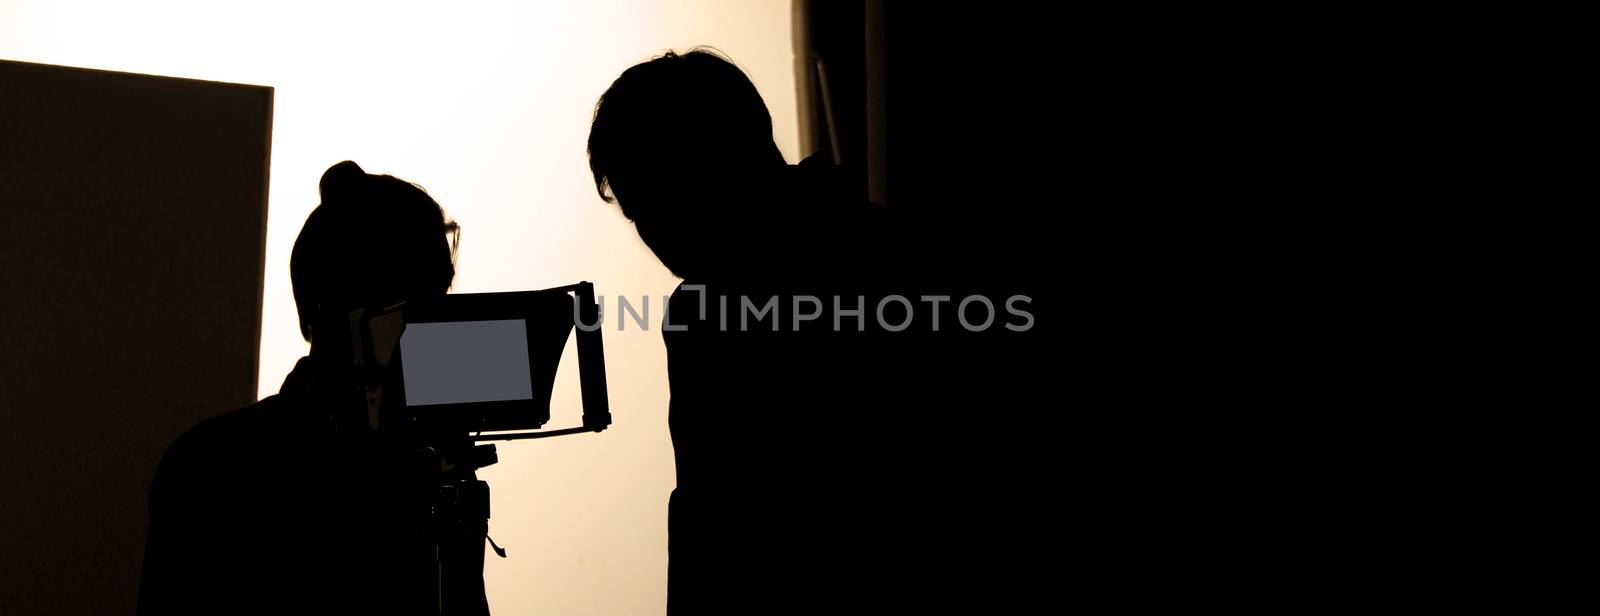 Shooting studio behind the scenes in silhouette images which film crew team working for filming movie or video with professional lighting and equipment such as camera, tripod, soft box, monitor